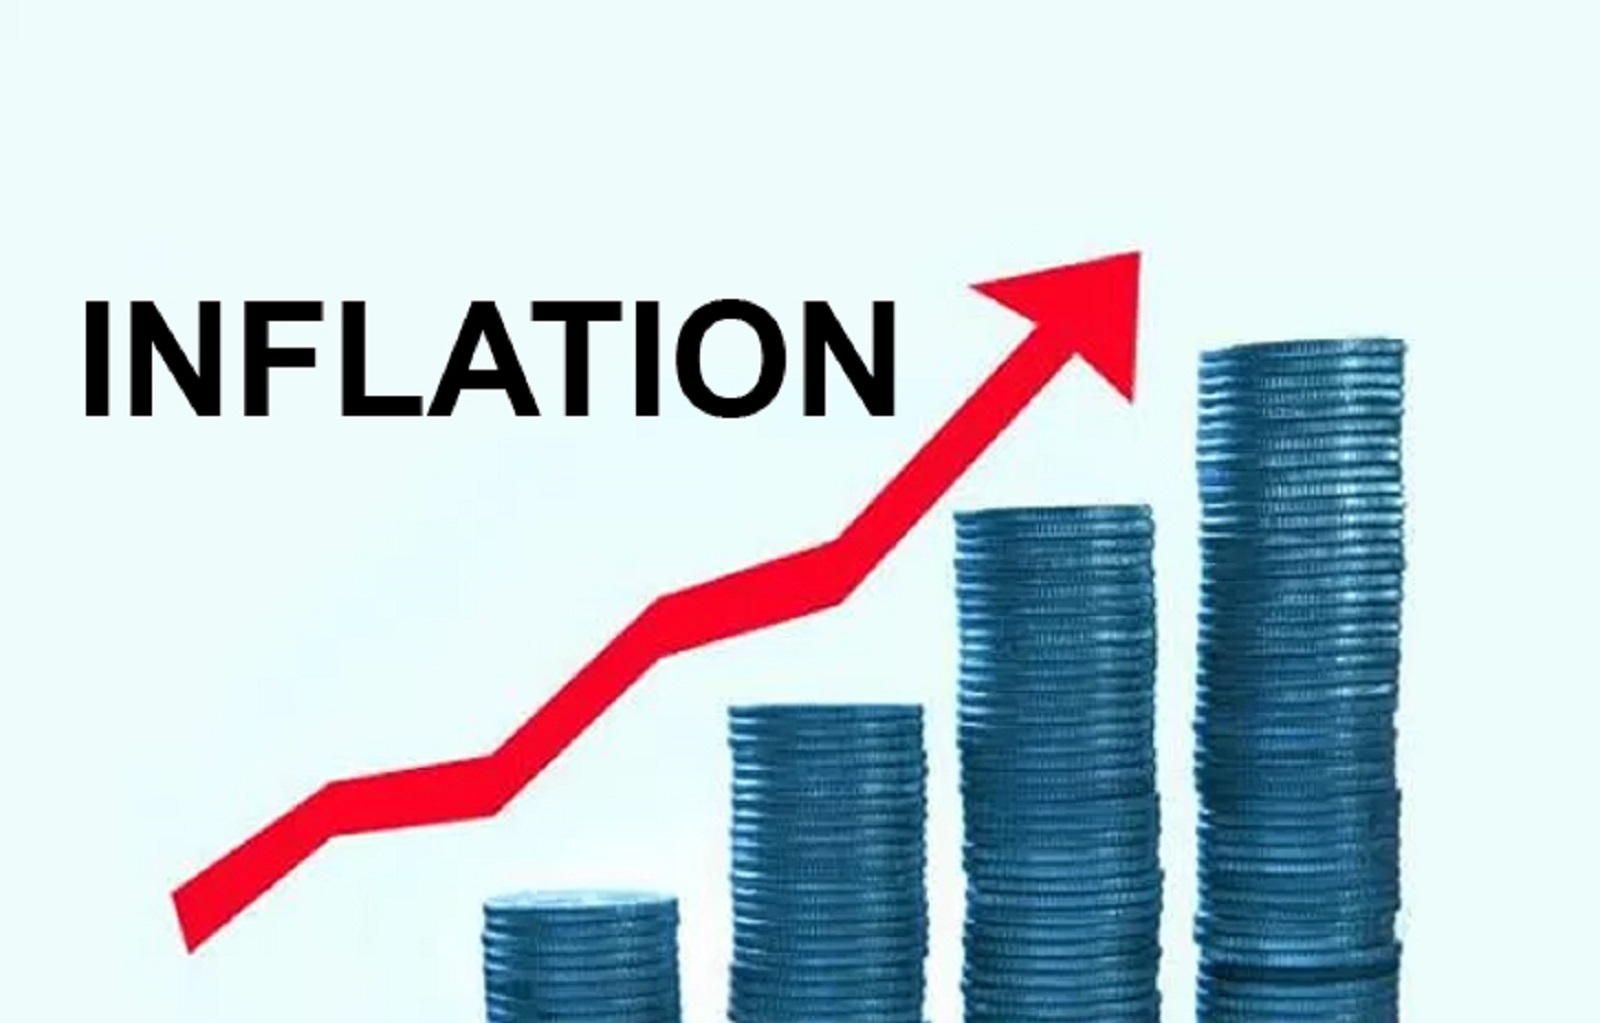 Nigeria’s inflation rate hits 18.17%